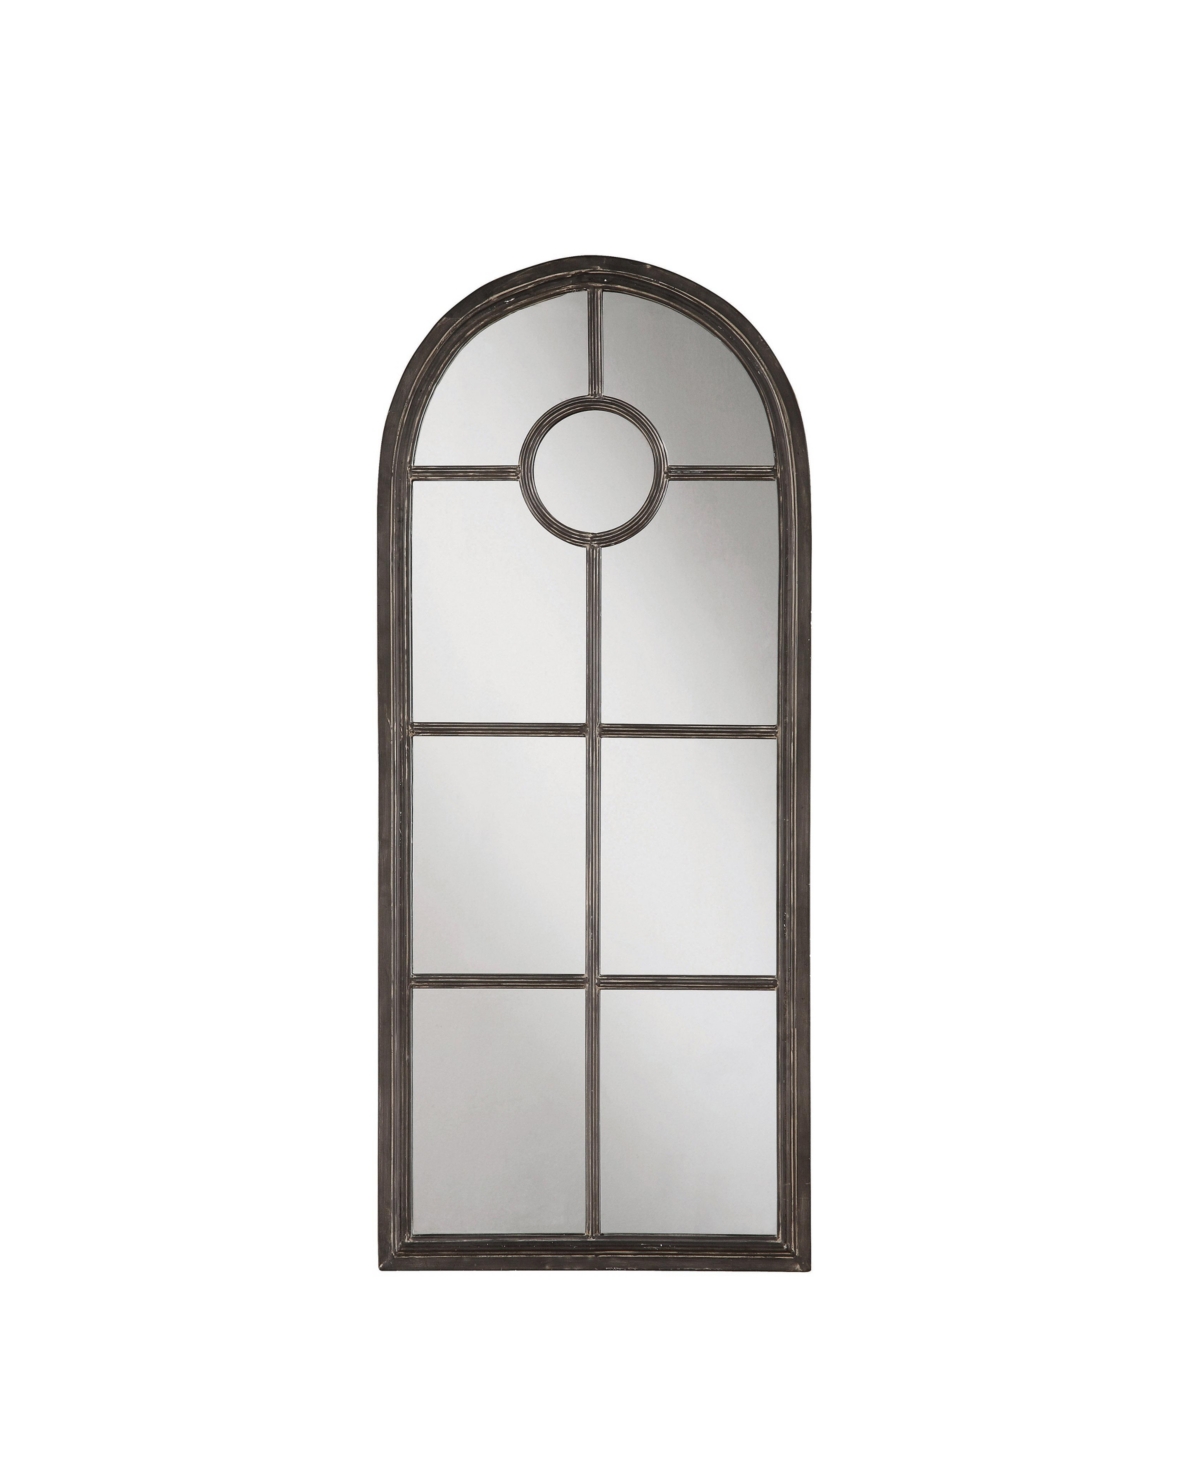 Distressed Arched Metal Wall Mirror with Window Pane, Black - Brown